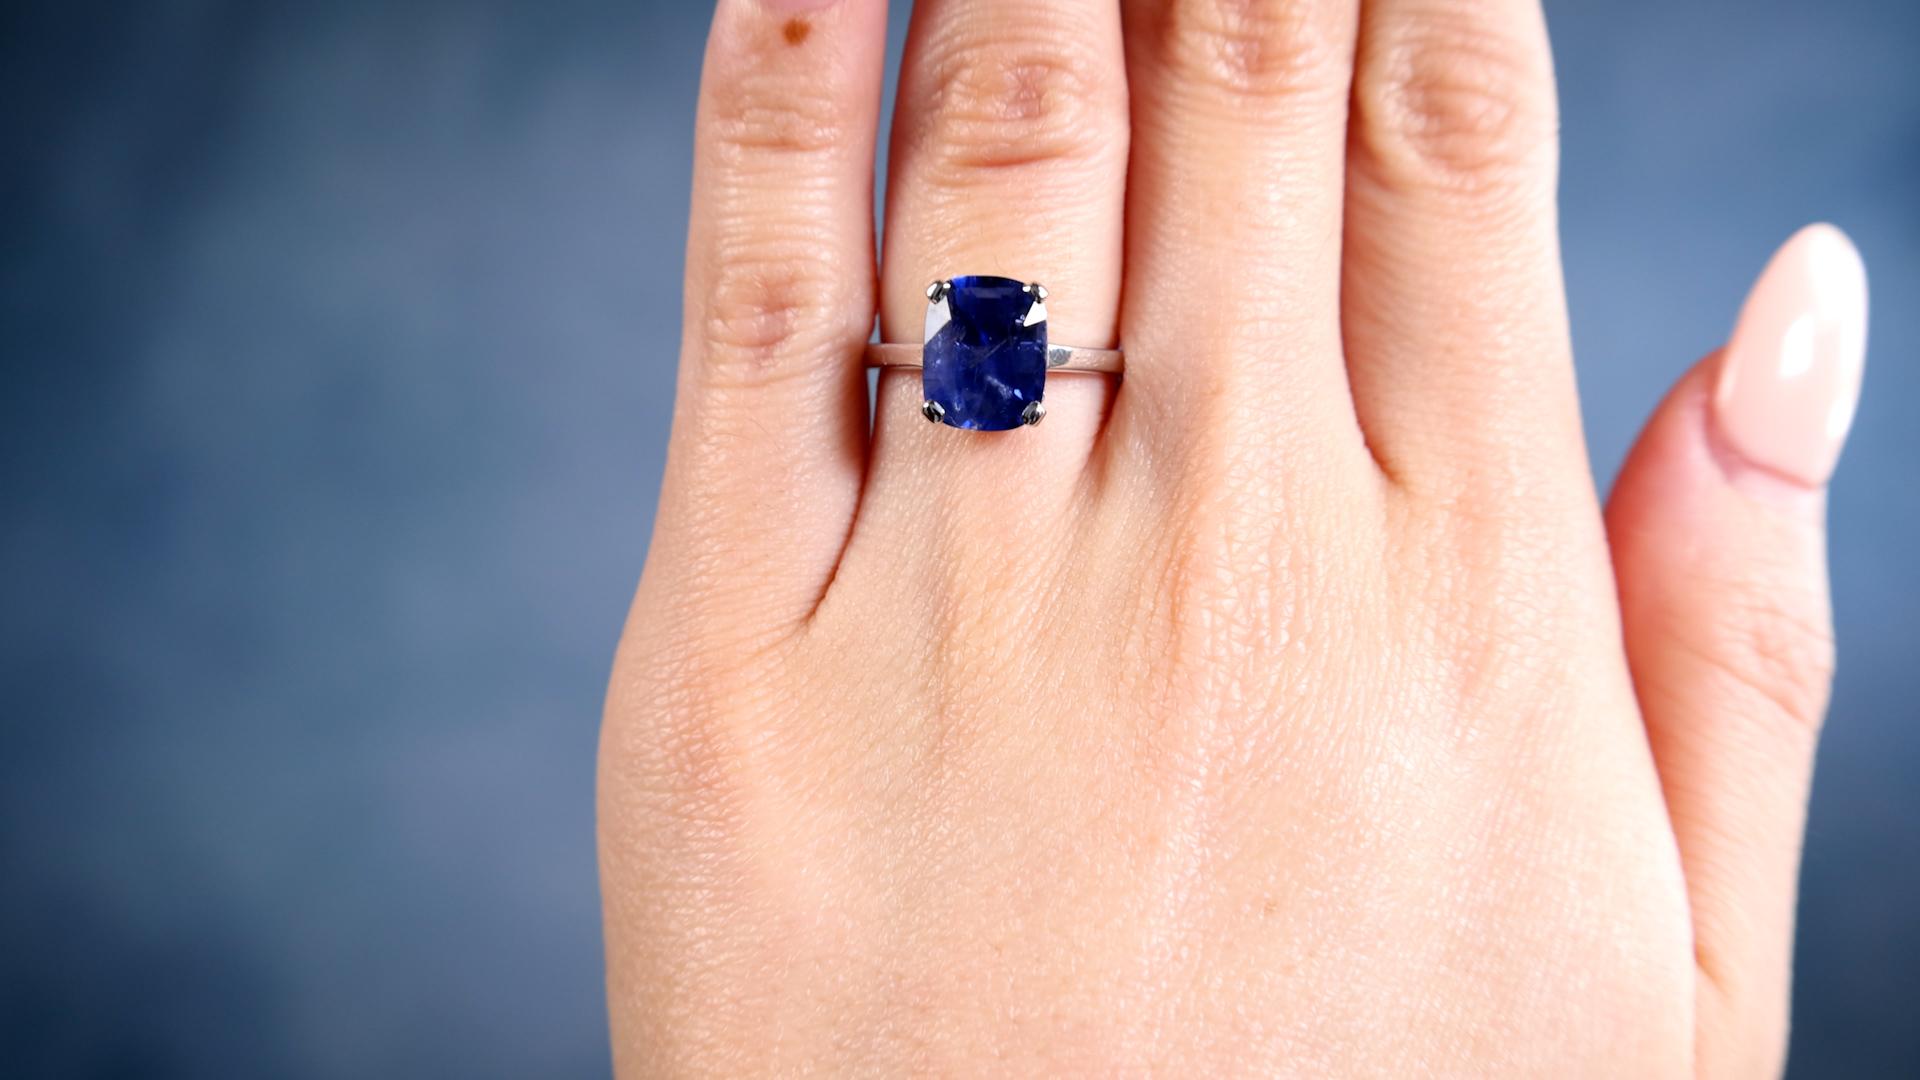 One Vintage French GIA 4.24 Carat Ceylon Sapphire 18k White Gold Solitaire Ring. Featuring one GIA cushion mixed cut sapphire of 4.24 carats, accompanied by GIA #2239197750 stating the sapphire is of Ceylon (Sri Lanka) origin. Crafted in 18 karat